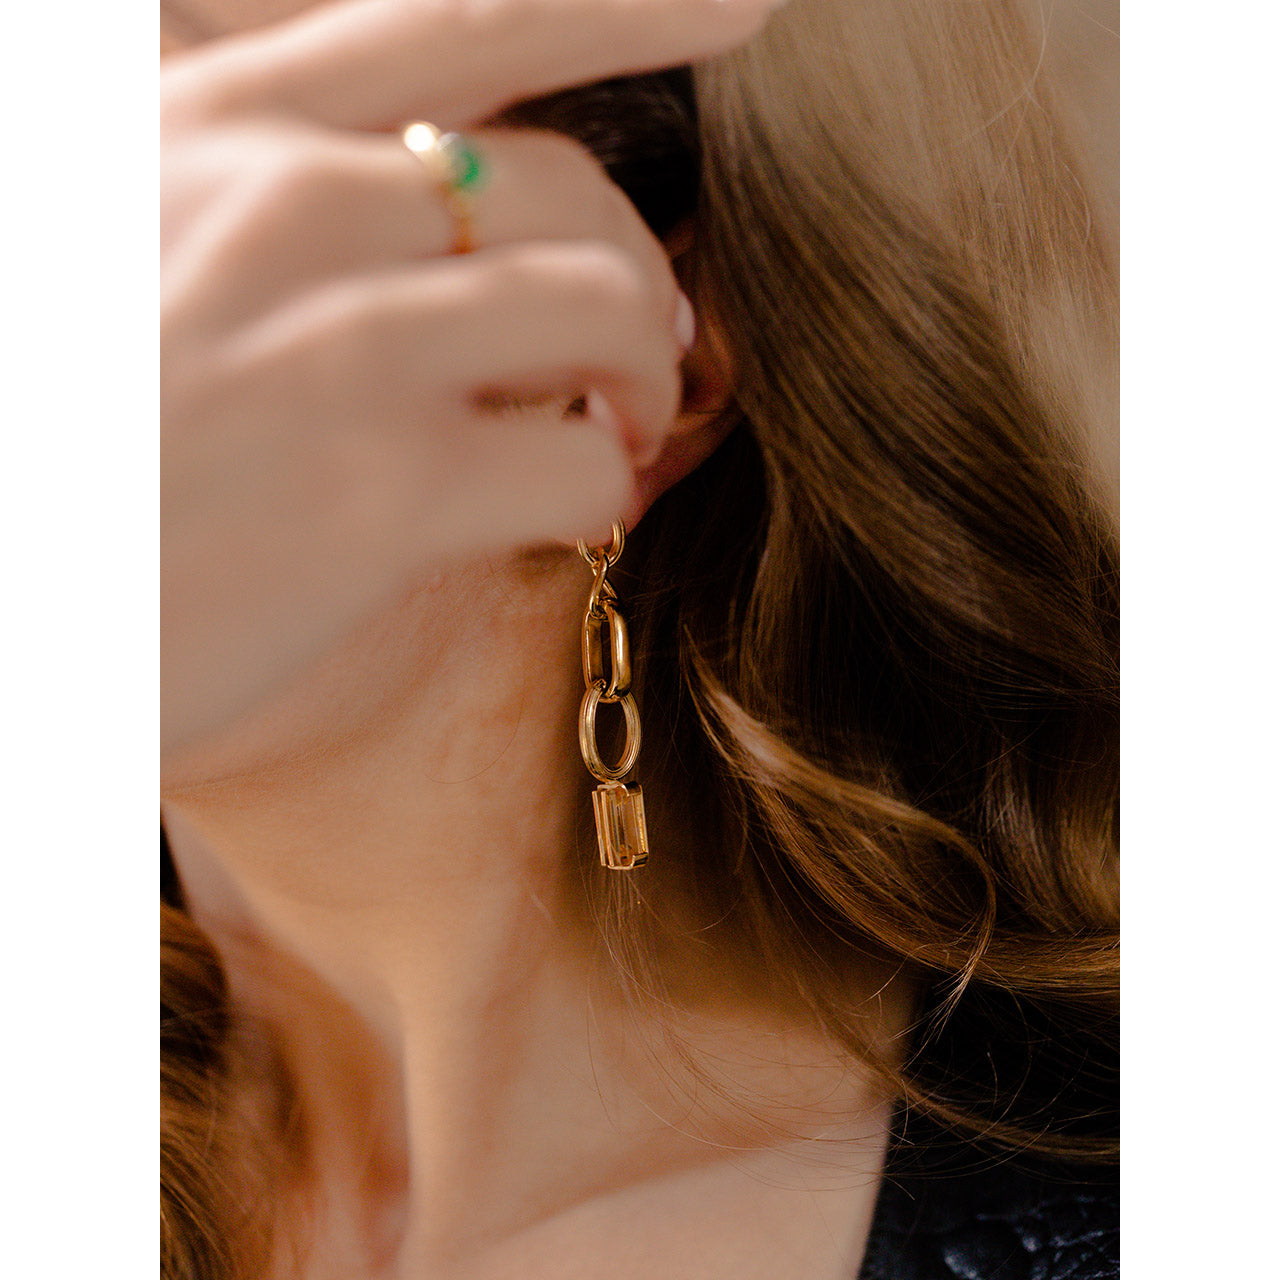 These refined long earrings are designed with a combination of four distinct chain links.